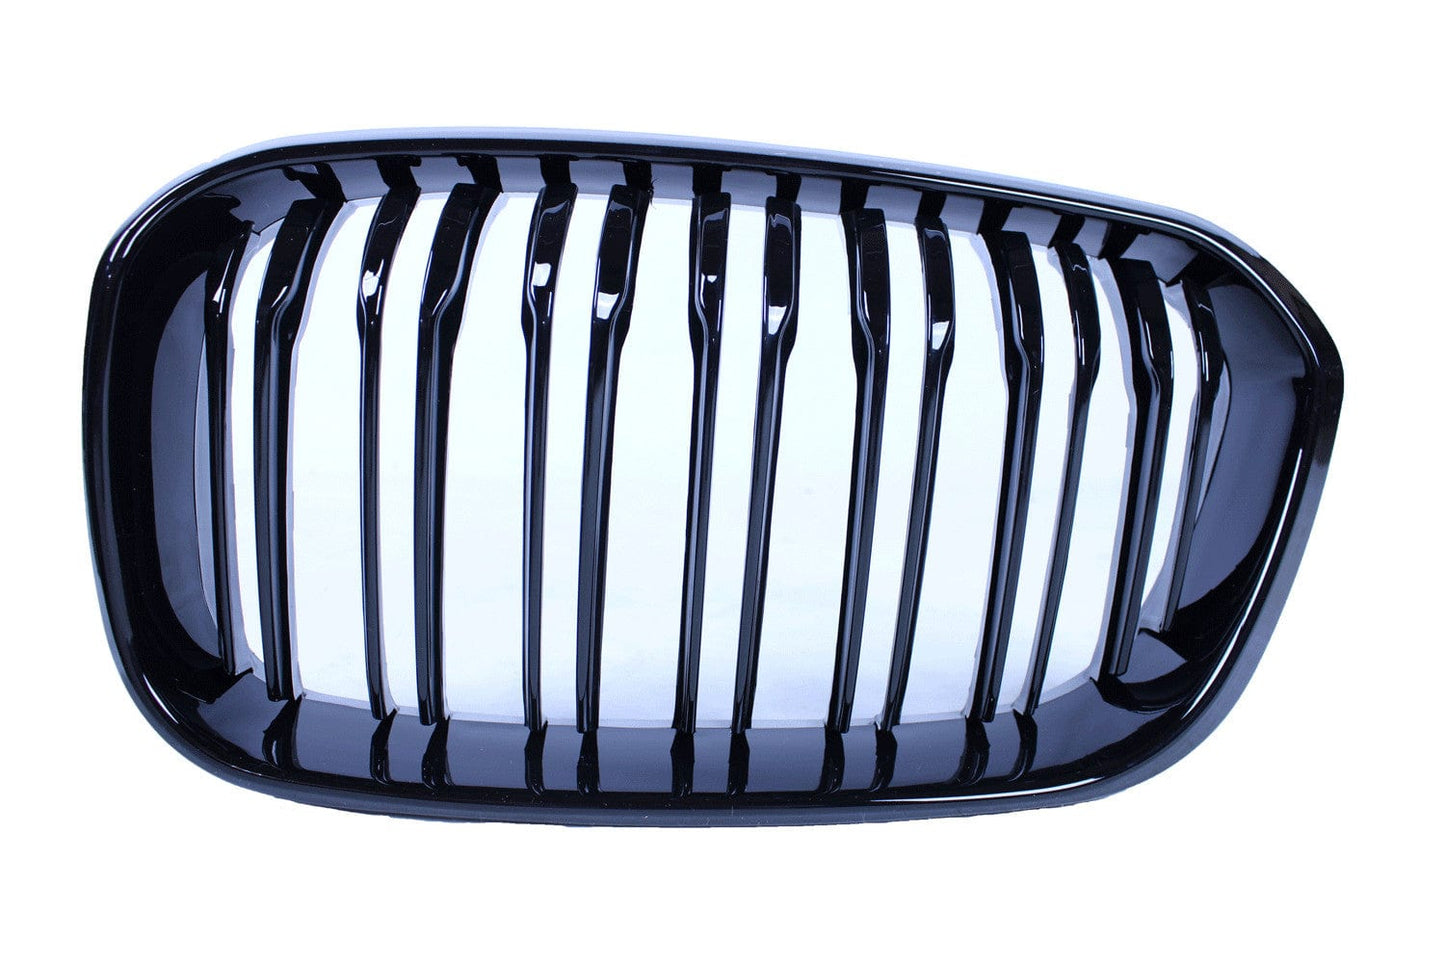 Grill kidney grille compatible with BMW F20 LCI 1 series gloss black double bars